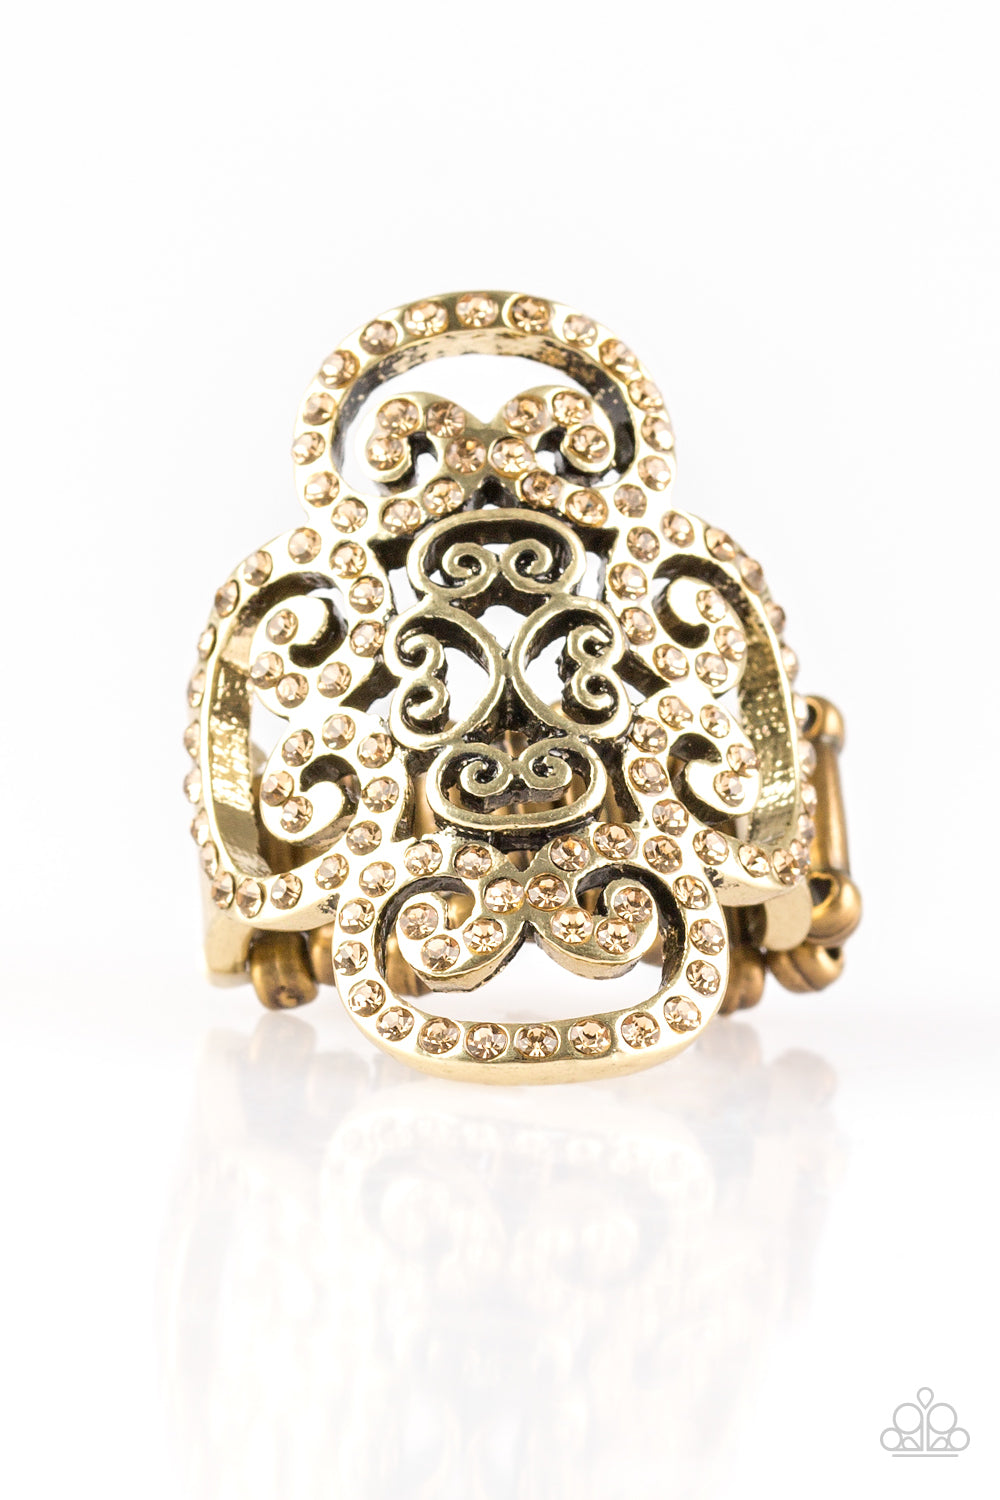 topaz rhinestones are encrusted along a glistening brass frame radiating with regal filigree